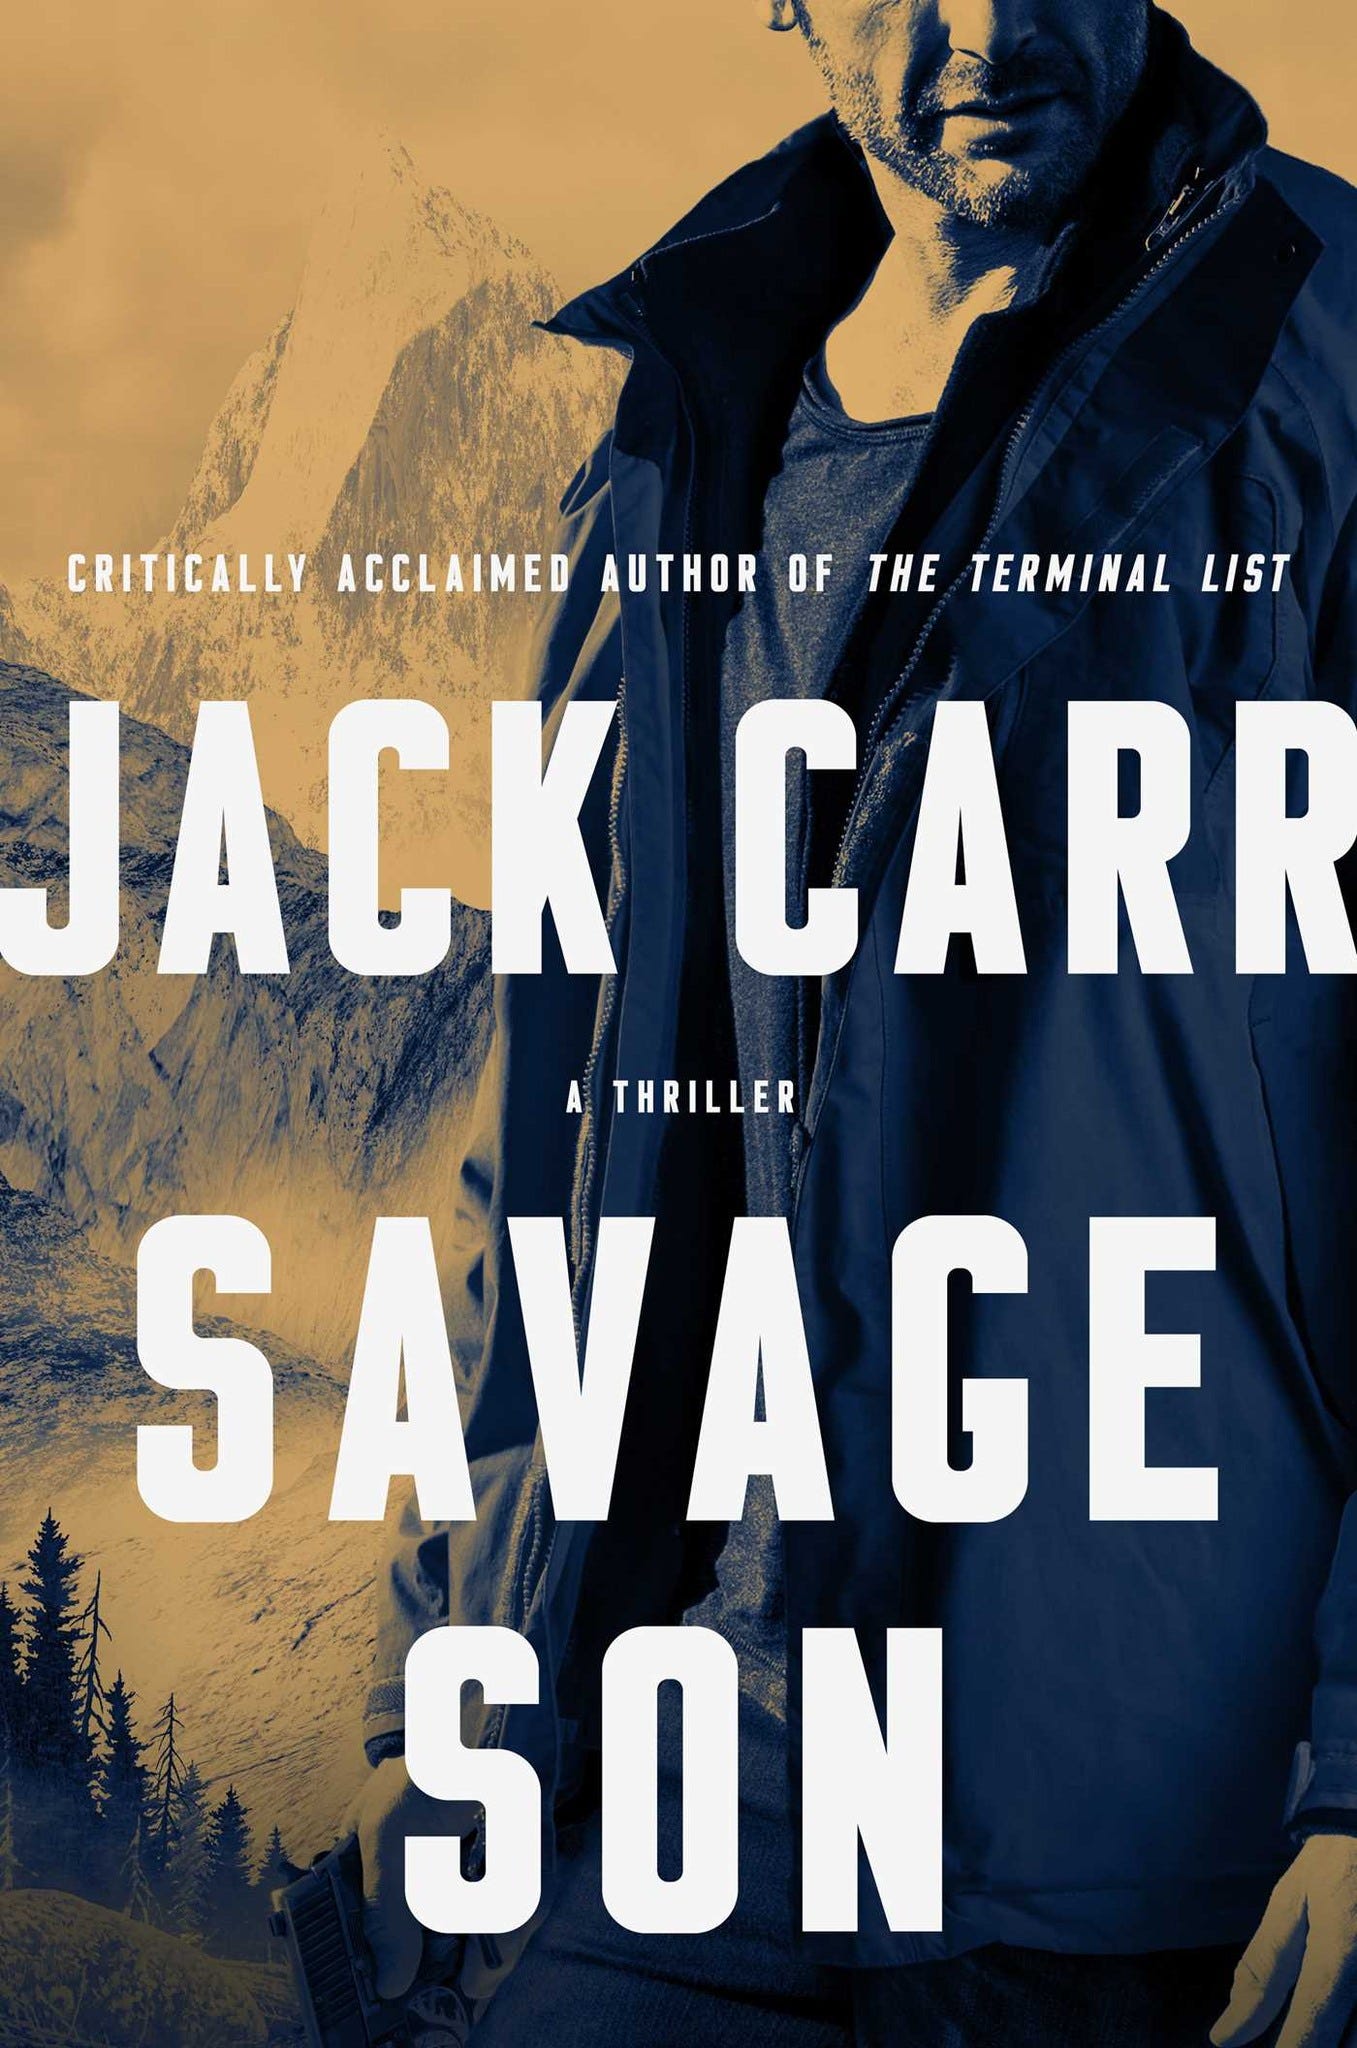 May be an image of 1 person and text that says 'CRITICALLY ACCLAIMED AUTHOR OF THE TERMINAL LIST JACK CARR THRILLER SAVAGE SON'